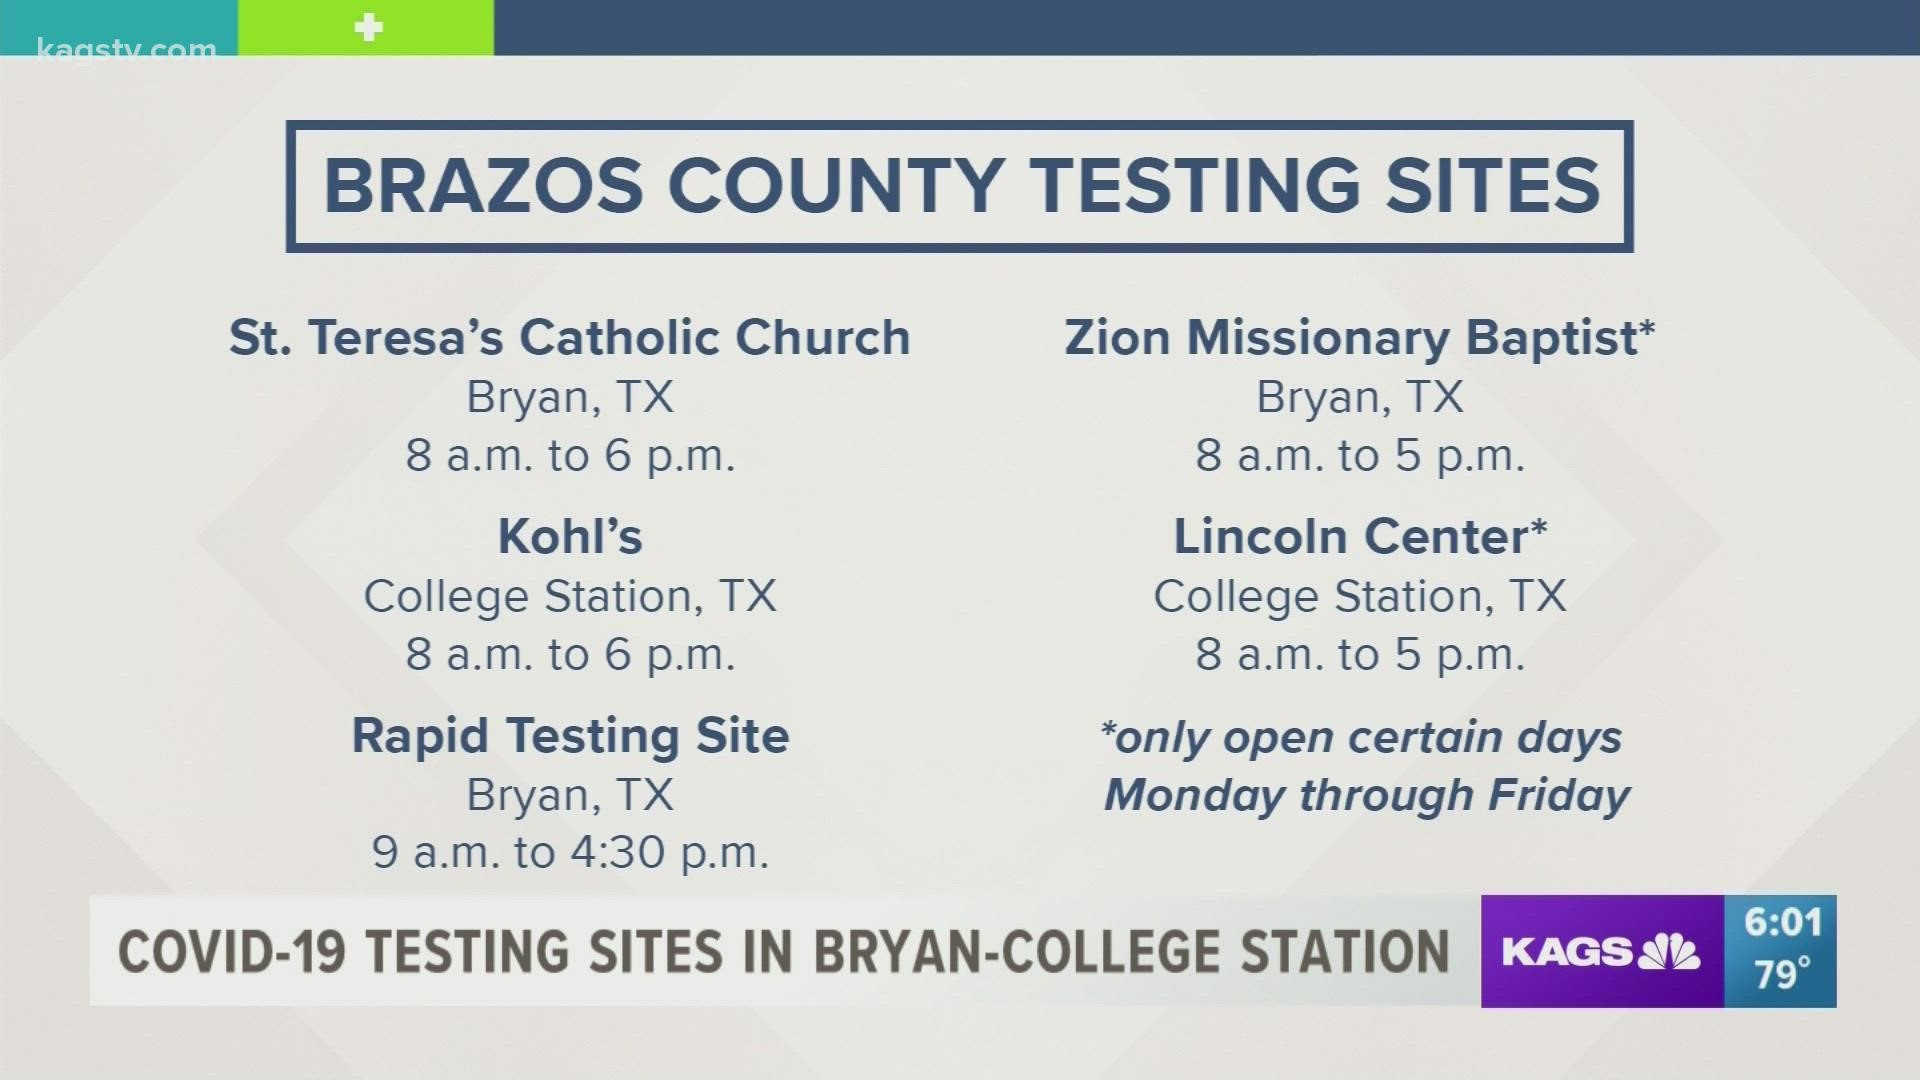 COVID-19 testing sites in Bryan-College Station